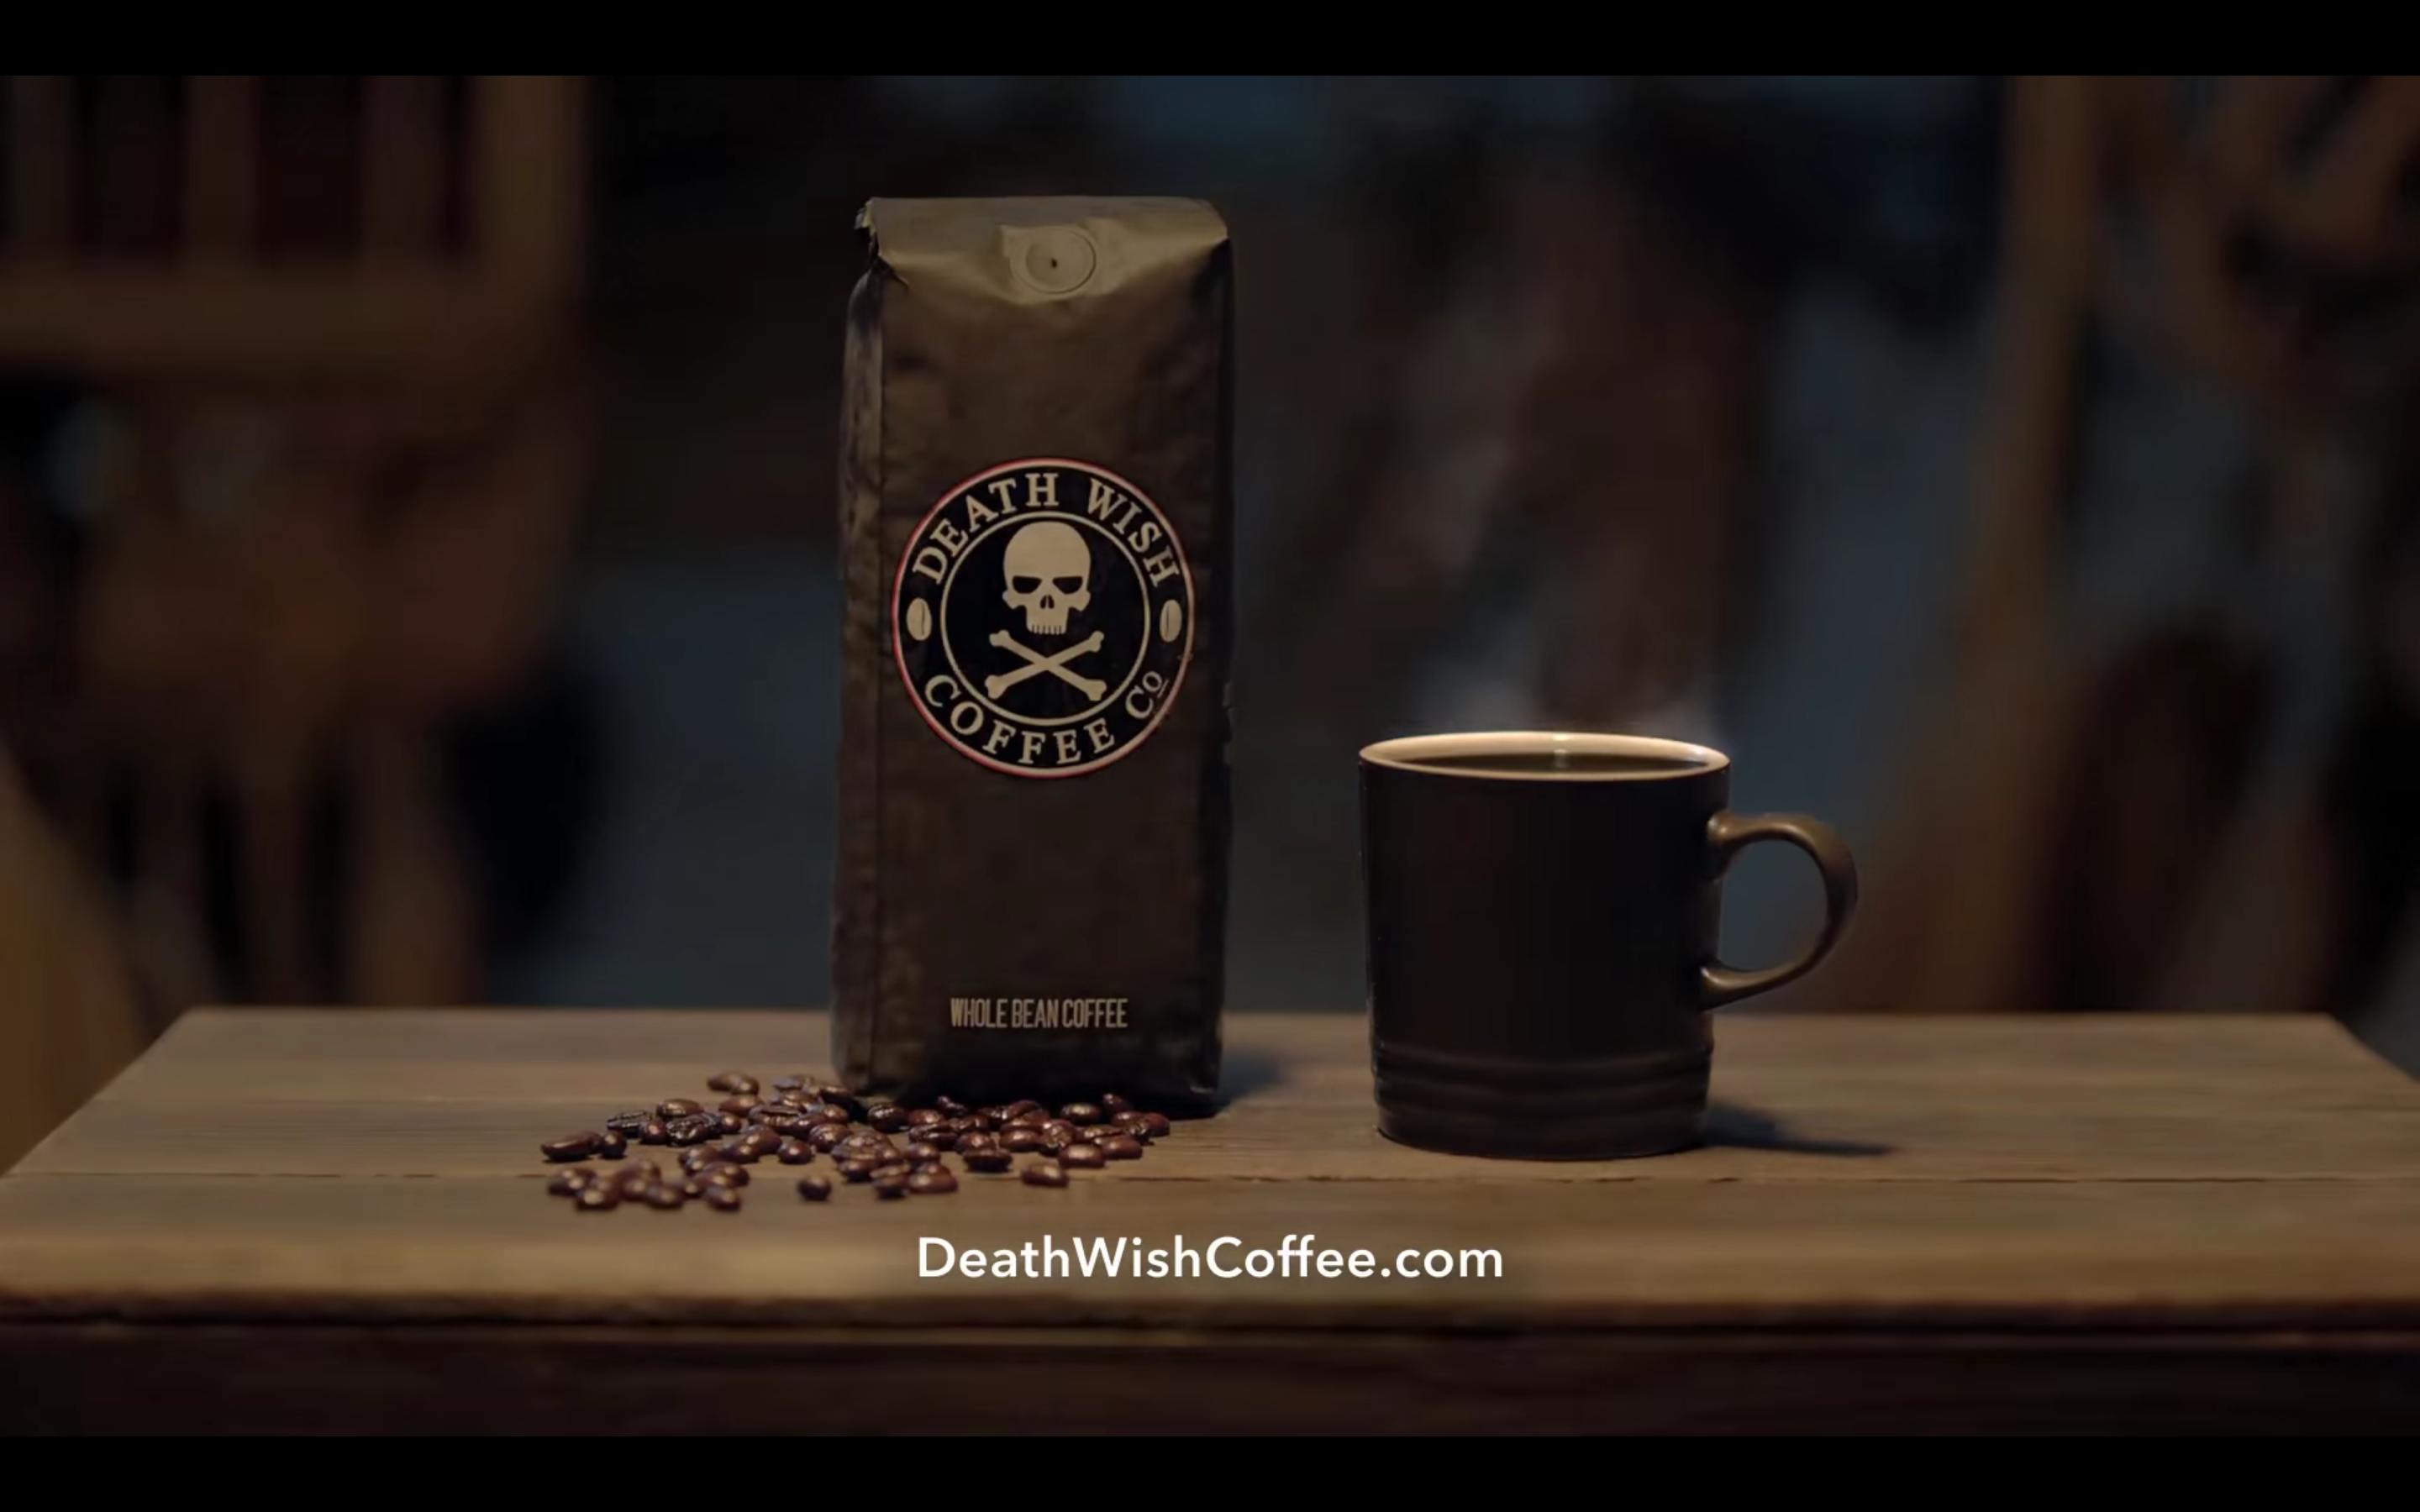 Death Wish Coffee Company Wins Super Bowl Ad - Famous Foodies